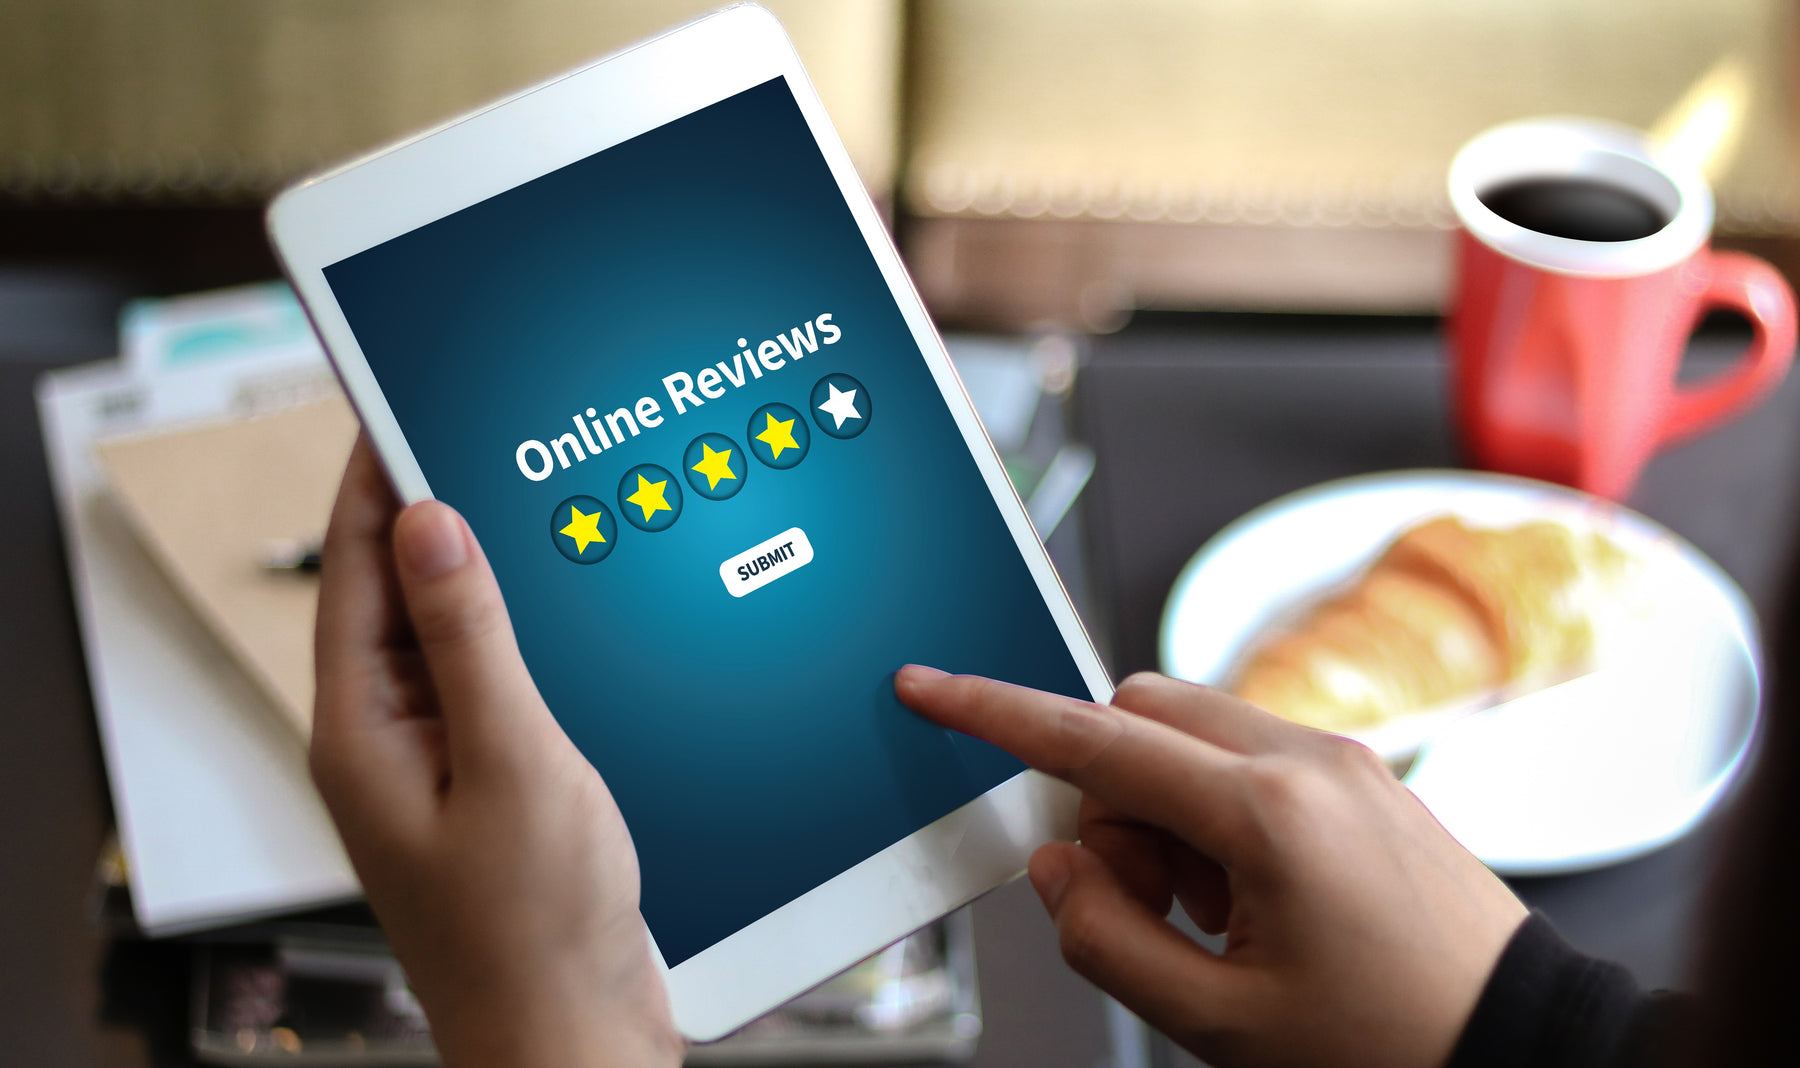 How Online Reviews Can Impact Your Business